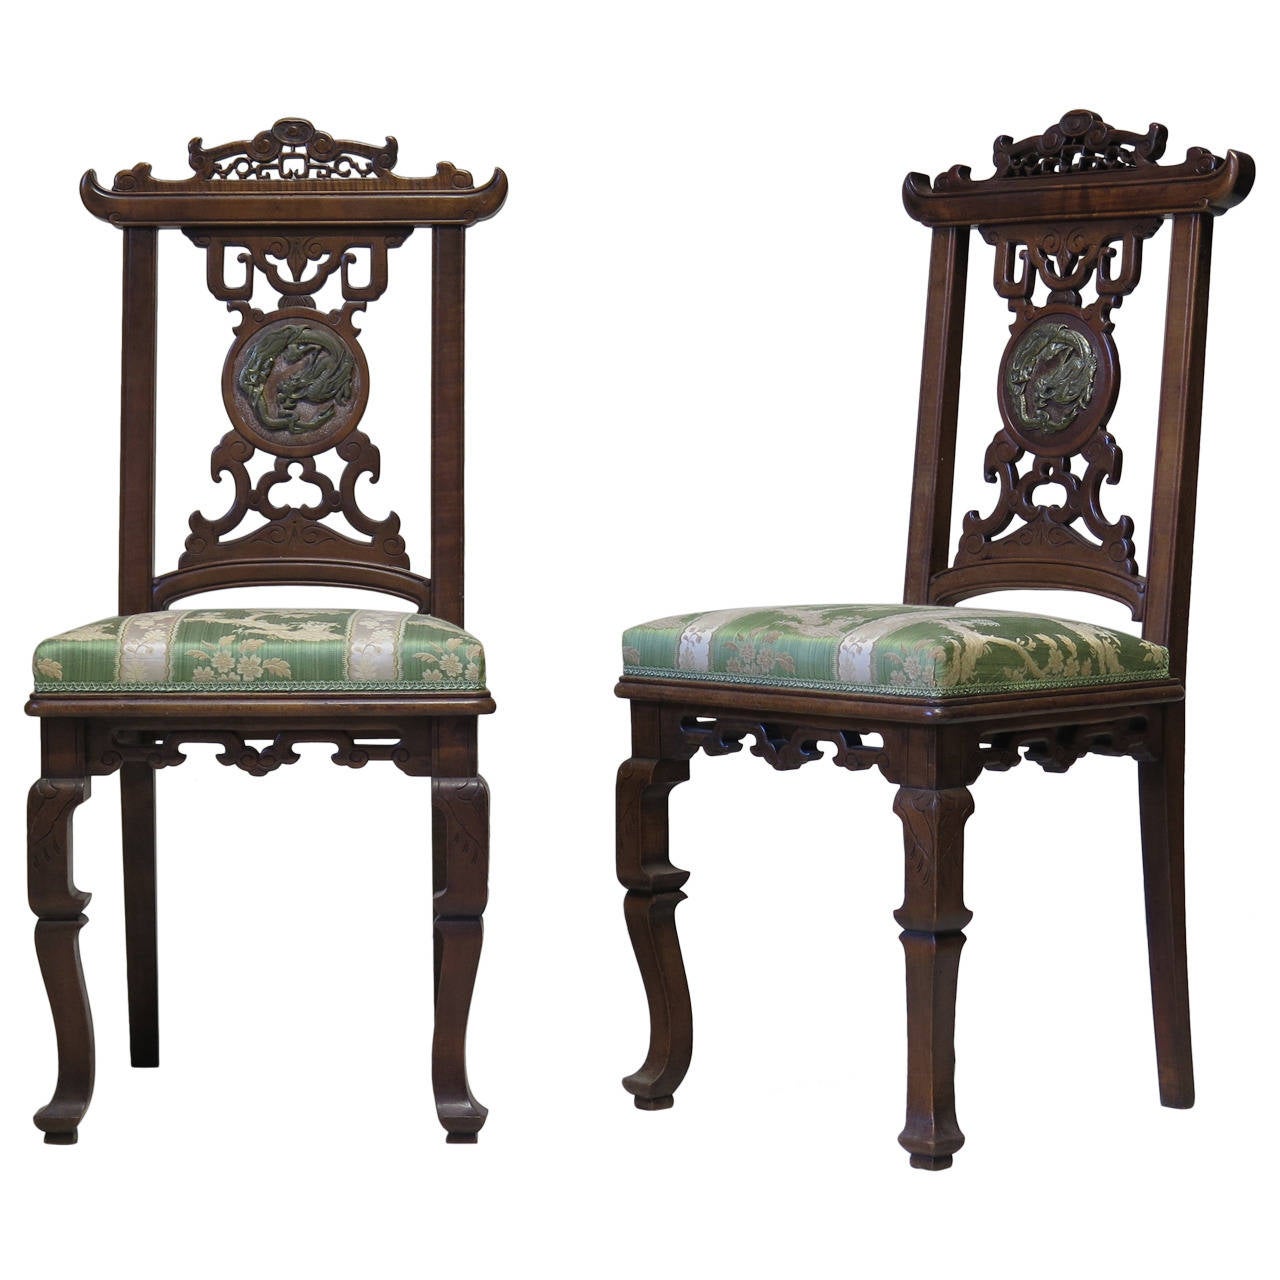 Exquisite Pair of Chairs Attributed to Gabriel Viardot, France, circa 1890